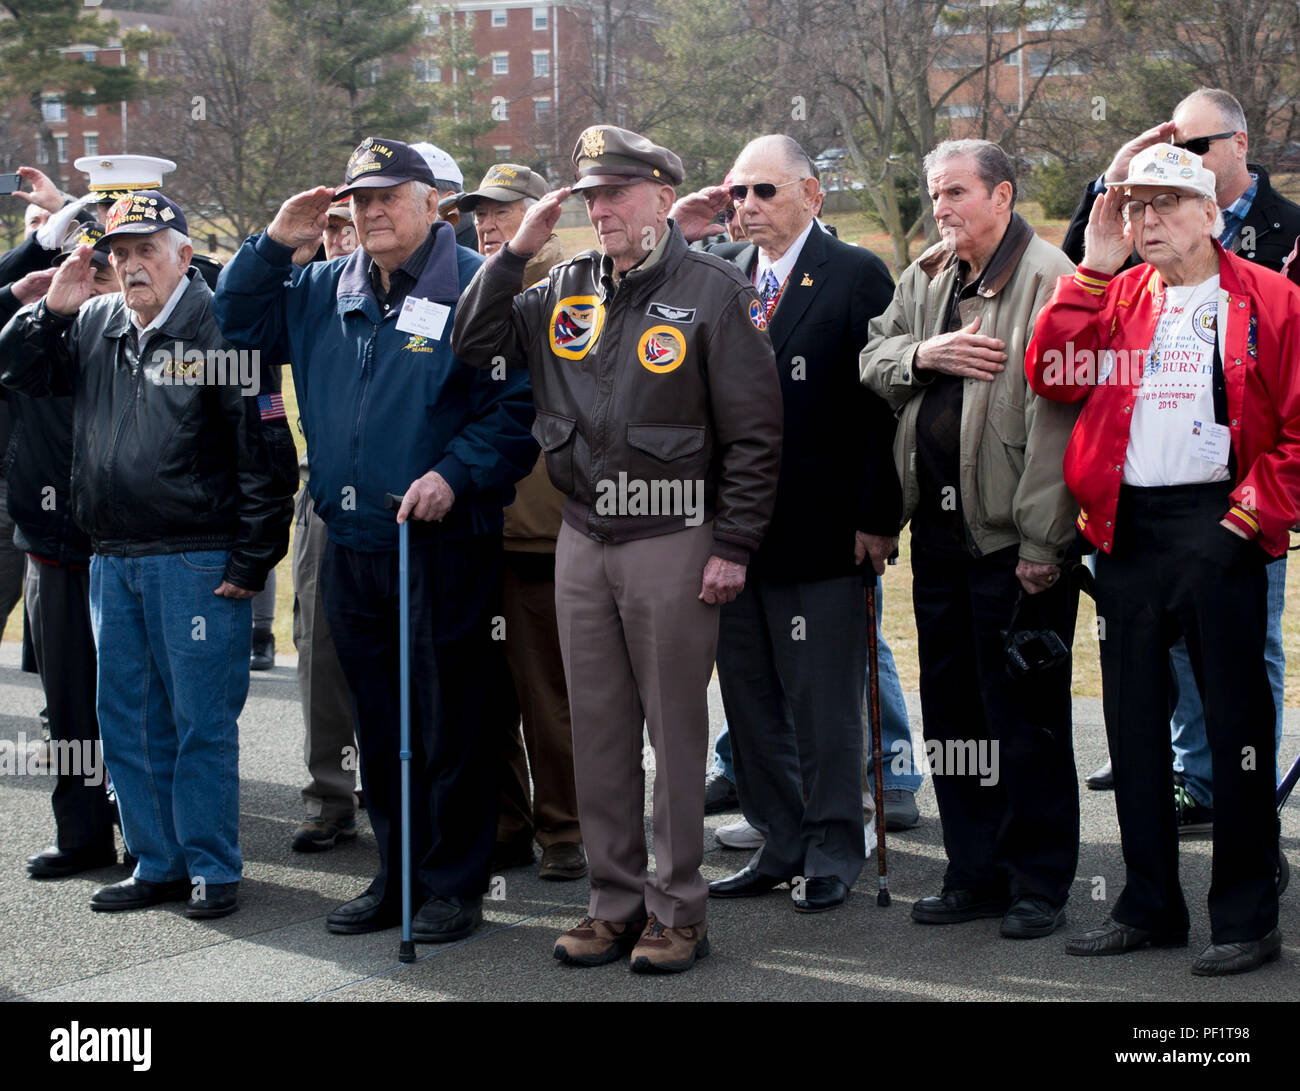 WWII veterans George Cattelona, USMC; Ira Rigger, USN; Jerry Yellin, USA; Gene Bell, USMC; Bud Hampton, USMC; and John Lazere, USN, render honors during a wreath laying ceremony at the Marine Corps War Memorial, Arlington, Va., Feb. 19, 2016. Earlier that morning, a memorial service commemorating the 71st anniversary of the landing on Iwo Jima took place at Crawford Hall, Marine Barracks Washington, D.C. Iwo survivors, family and friends traveled to the National Capitol Region to take part in the Iwo Jima Association of America’s 71st Anniversary, Reunion and Symposium. (Official Marine Corps  Stock Photo